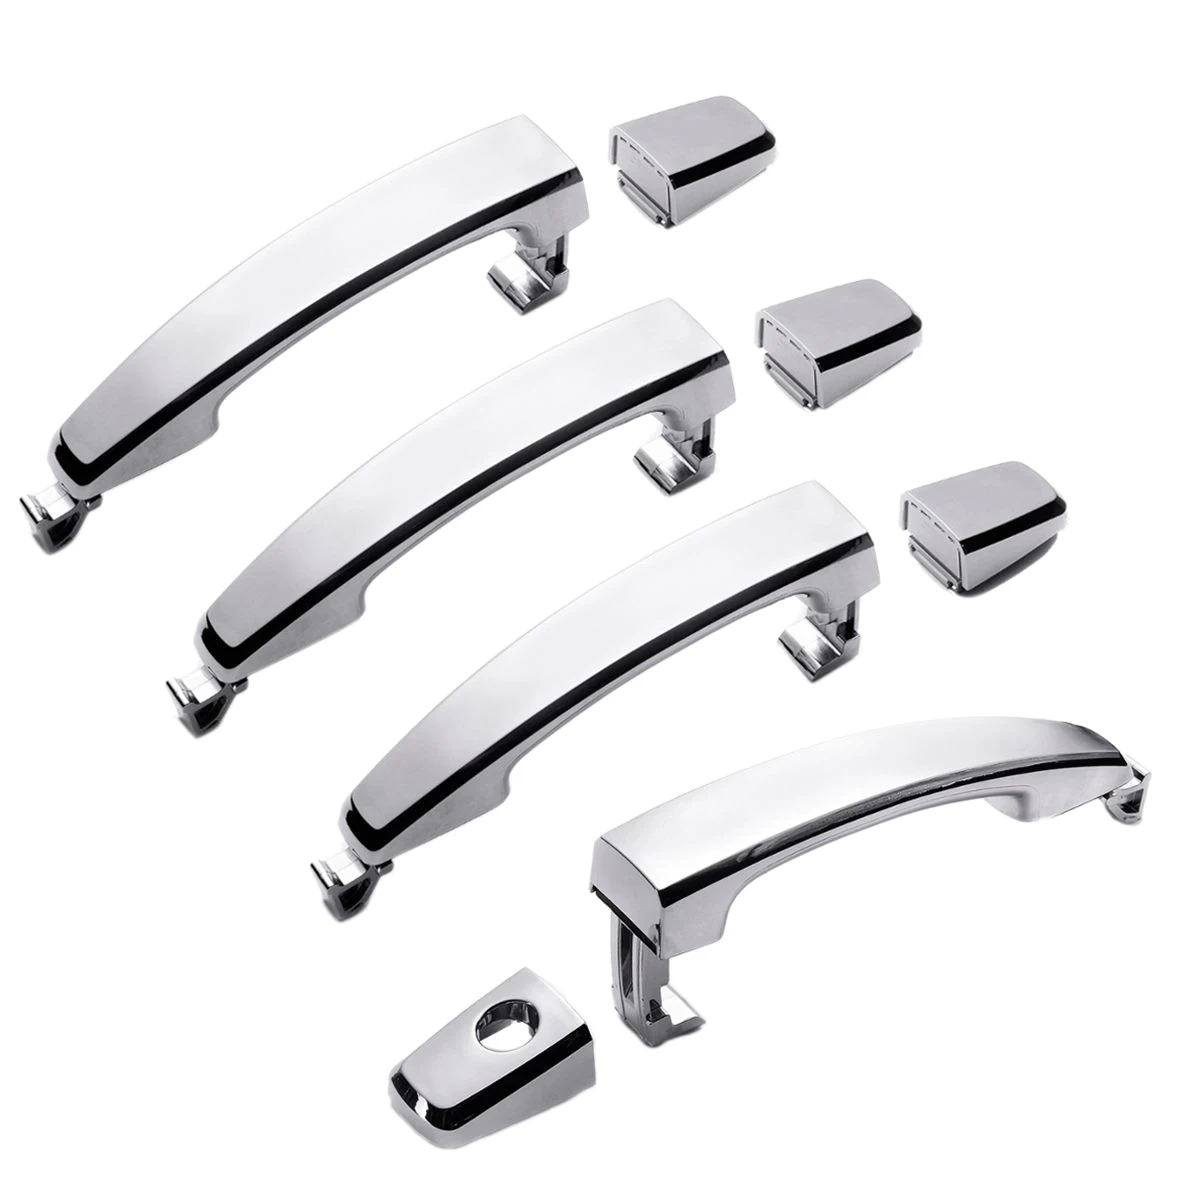 

4Pcs Chrome ABS Door Outer Handle Covers for Chevrolet Captiva Sport/Aveo/Saturn Vue 96468254 96468266 96468266